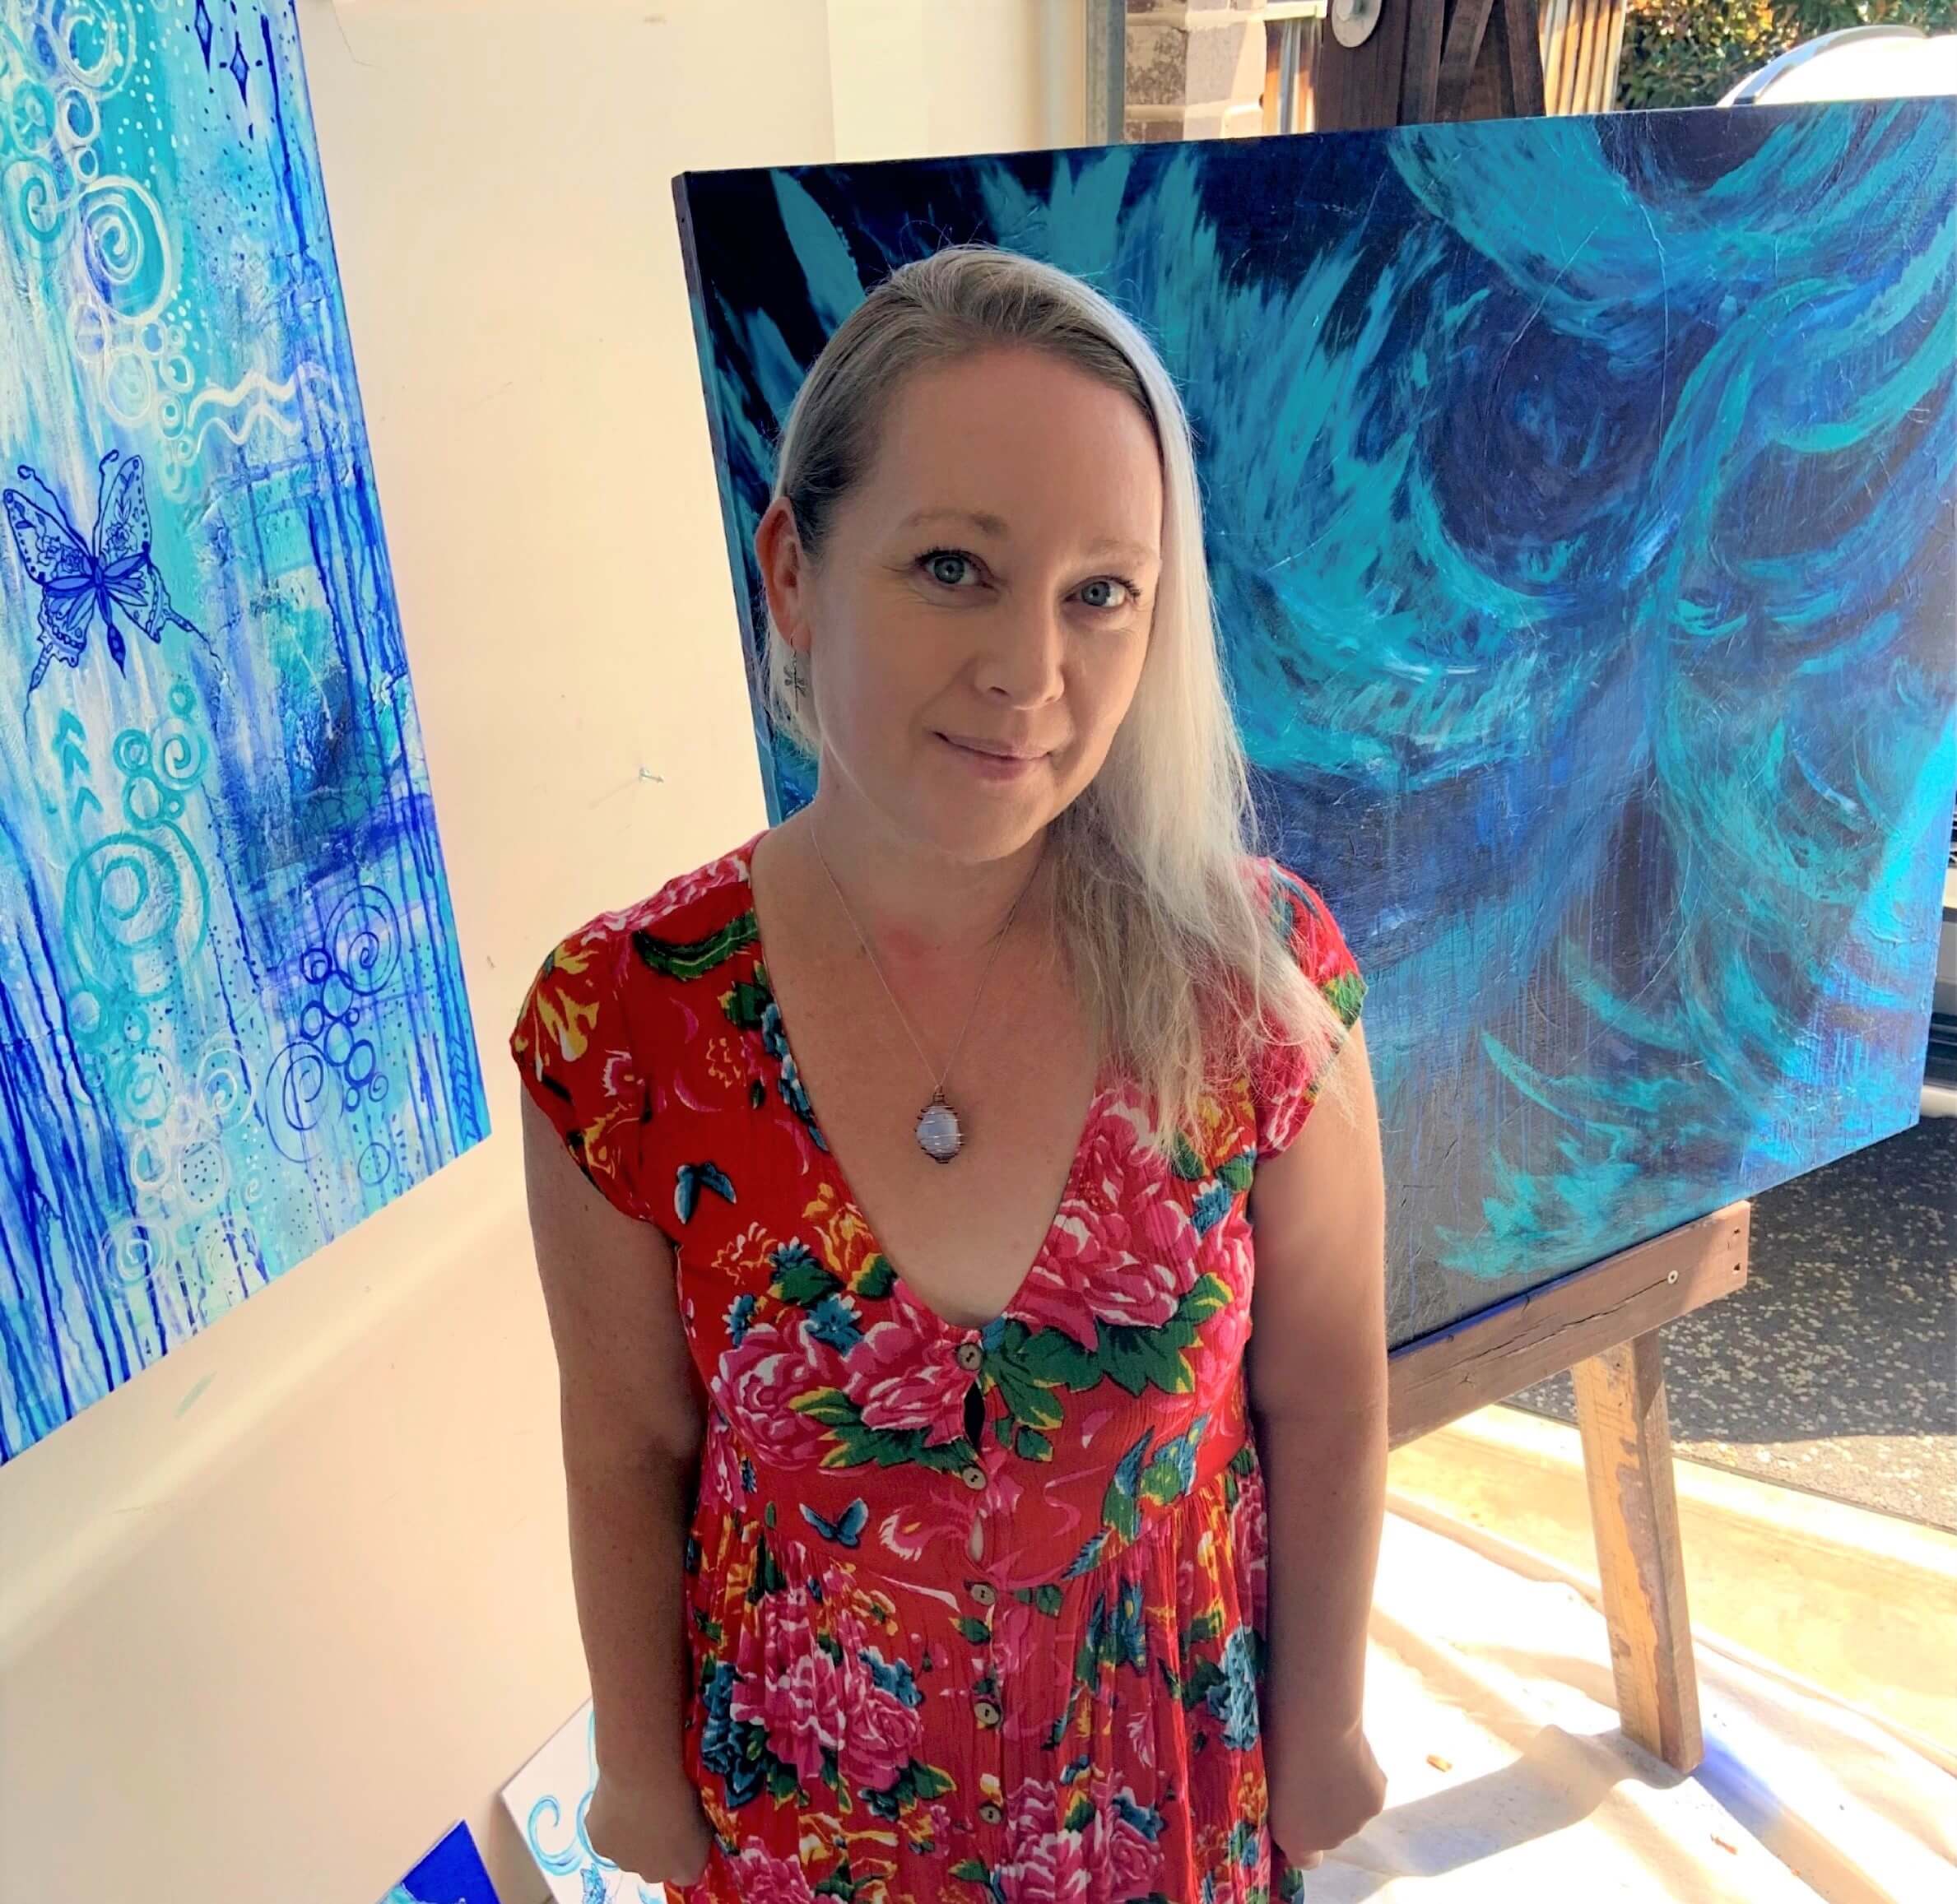 Artist Pauline Nicola standing in her studio with a blue artwork painted on an easel stands behind her.